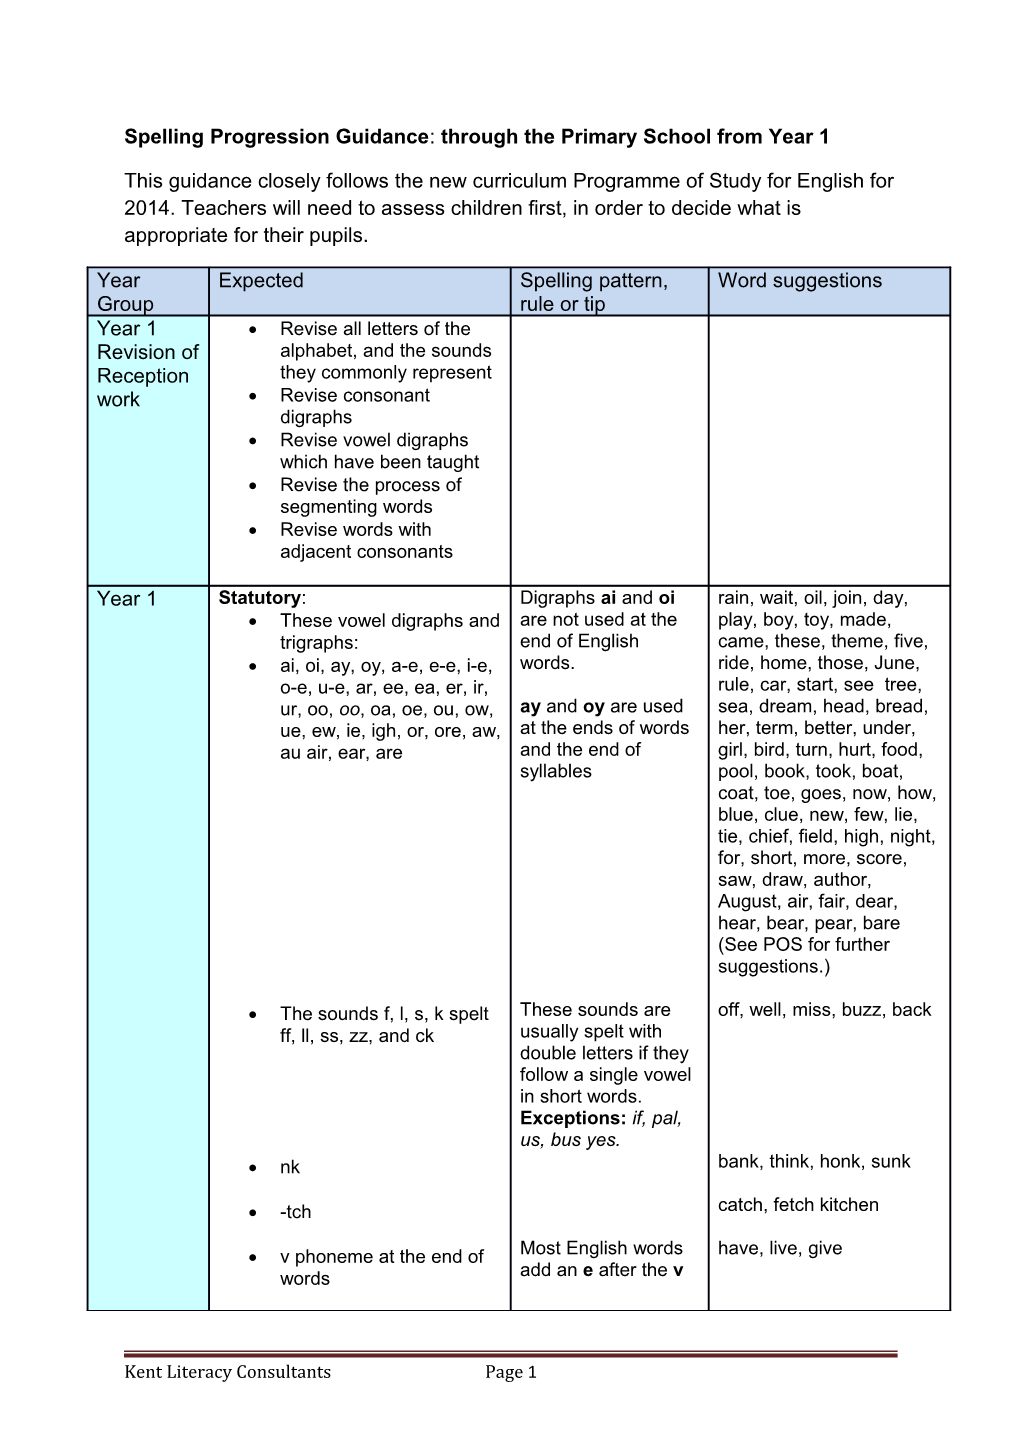 Spellingprogression Guidance: Through the Primary School from Year 1